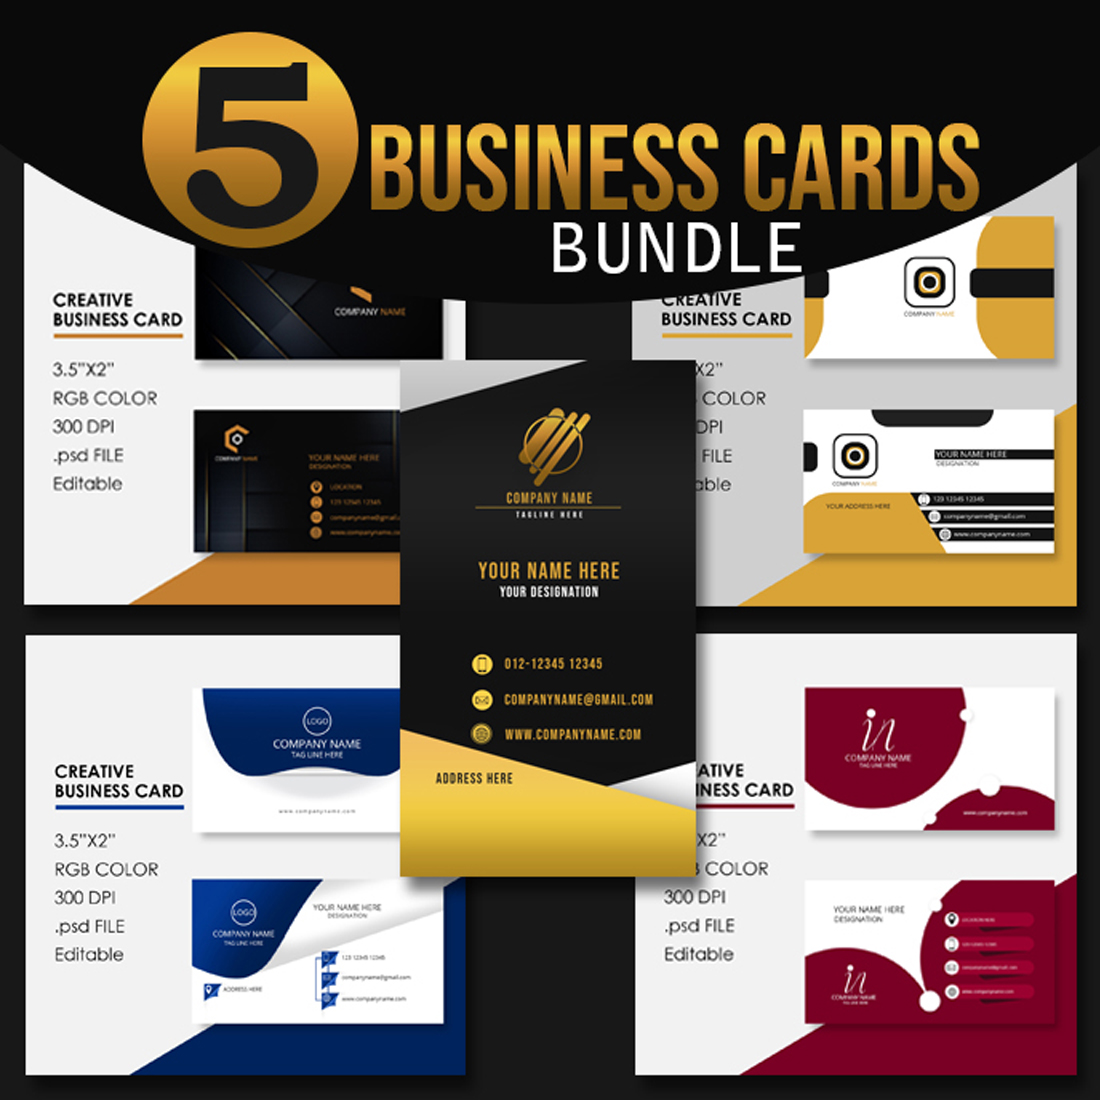 Business cards bundle cover image.